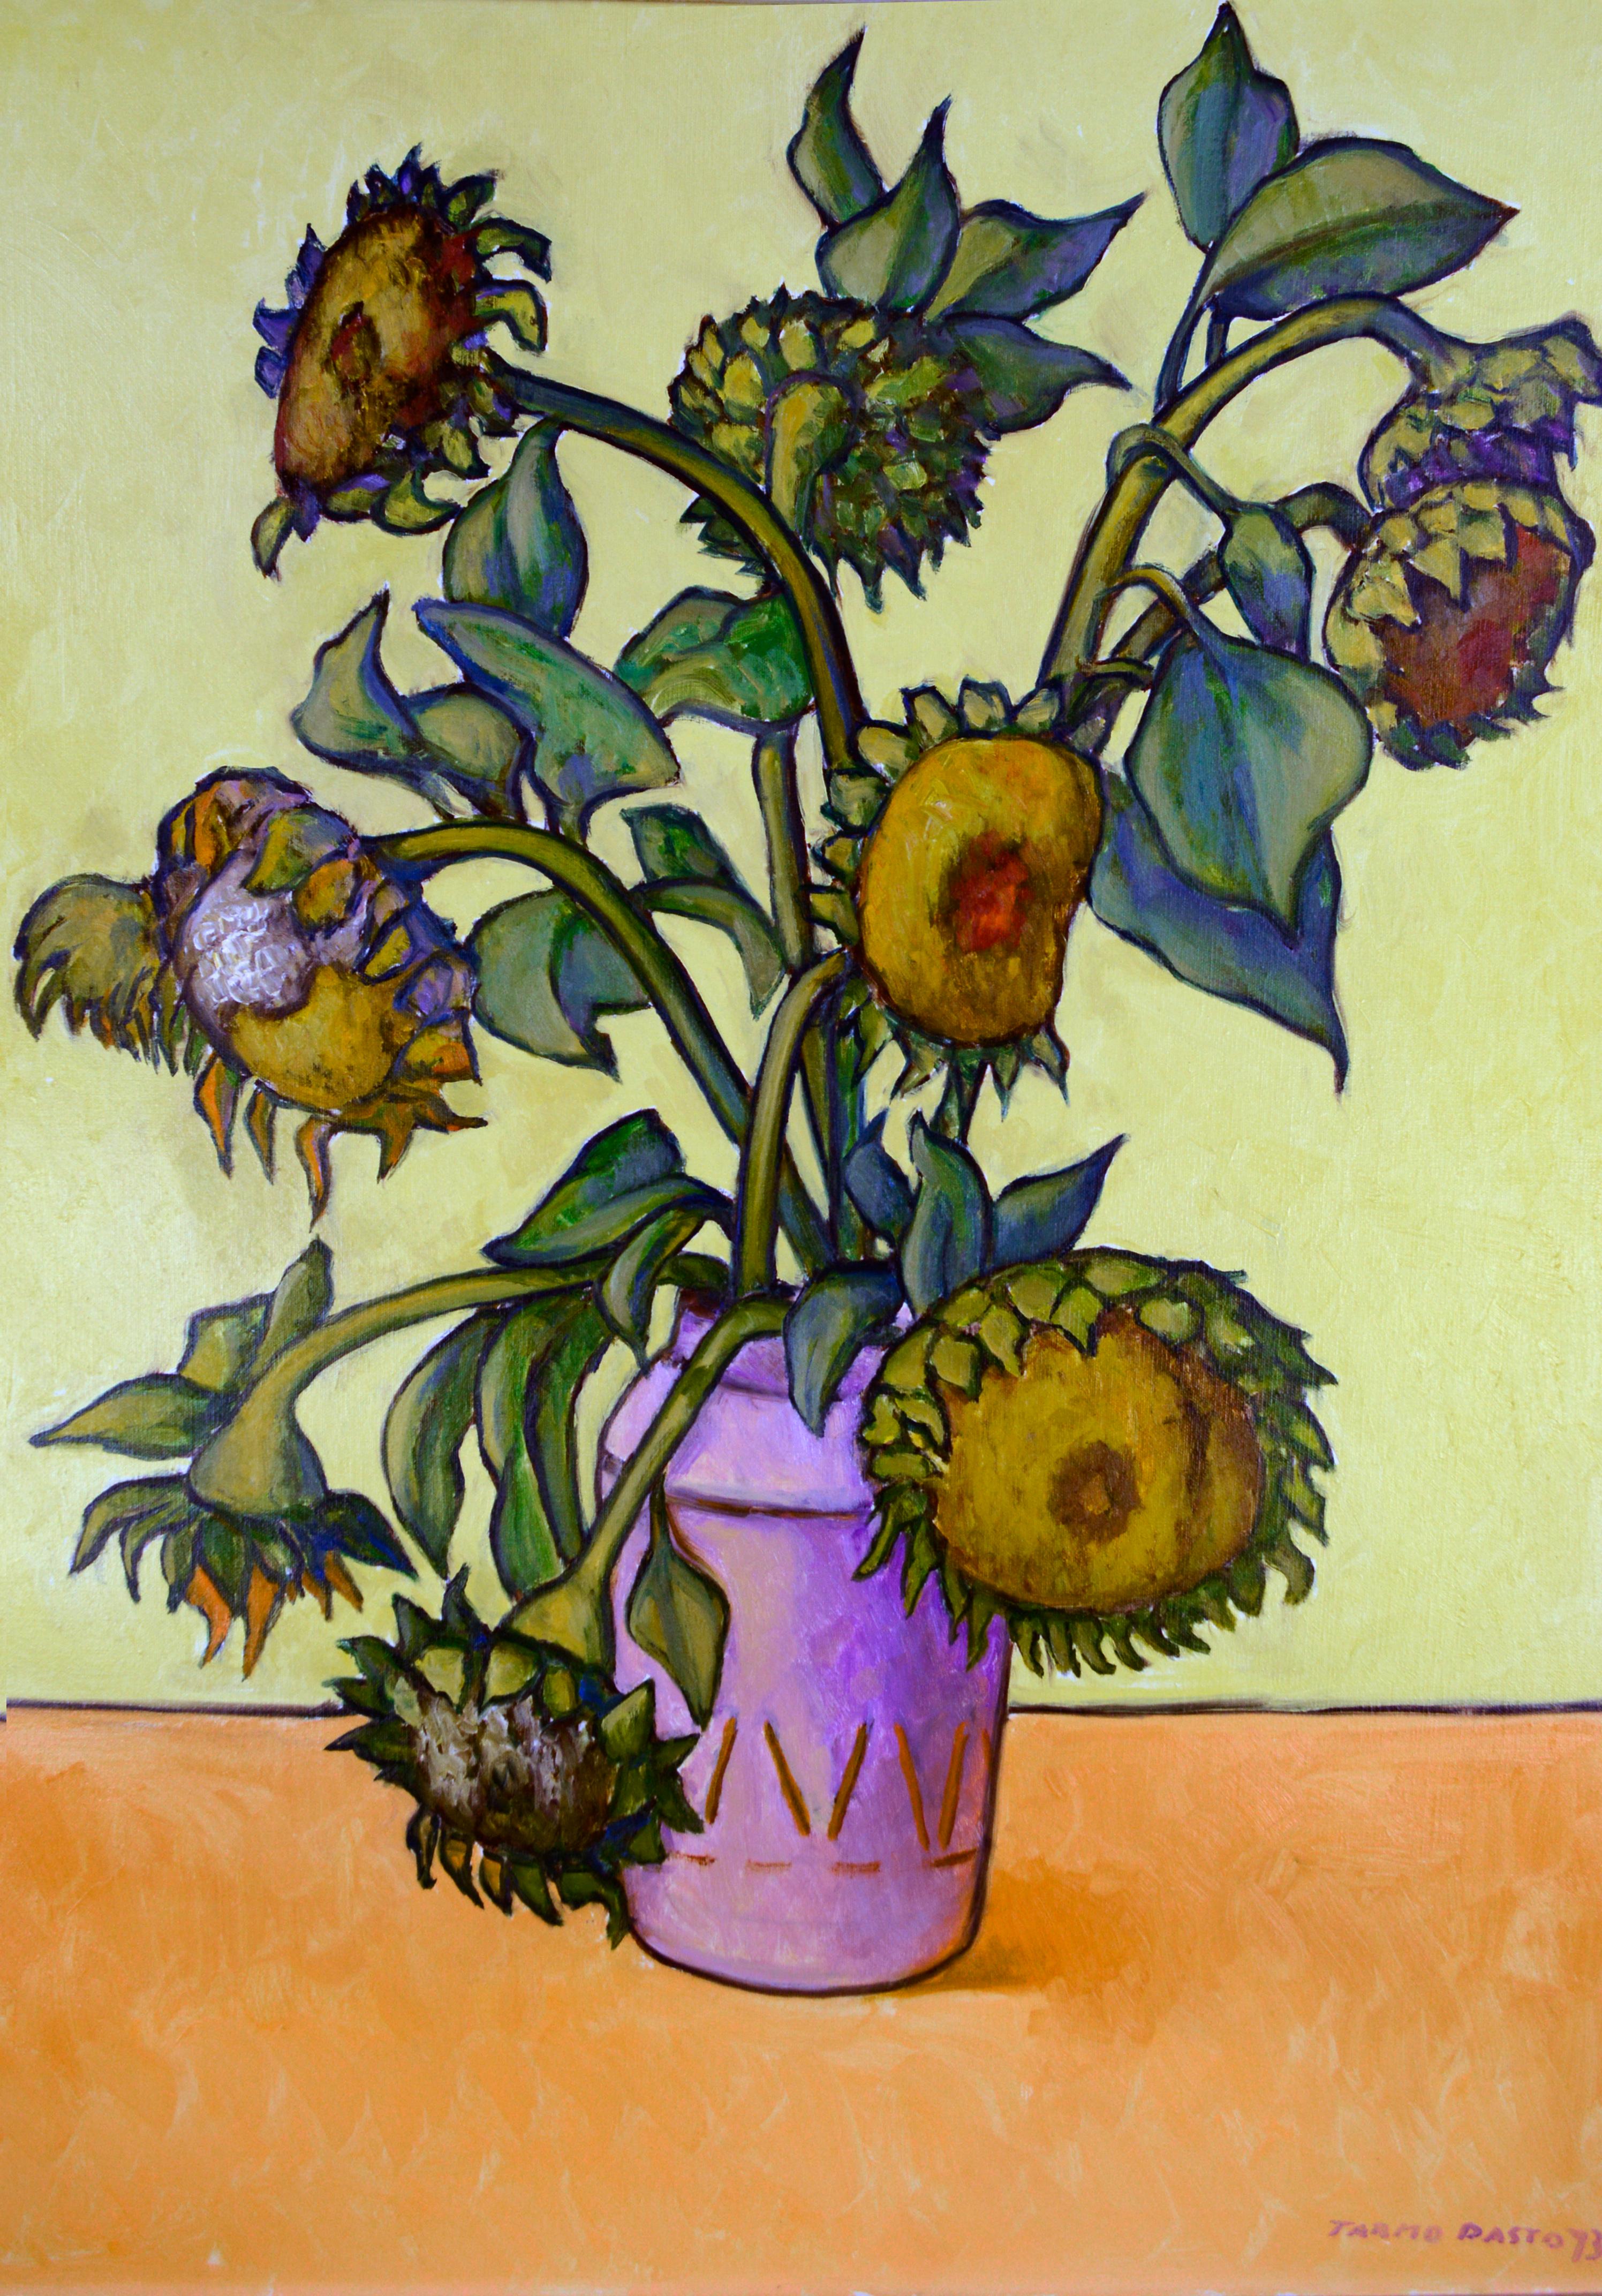 Sunflowers, Large Scale Modernist Floral Bouquet Still-Life by Tarmo Pasto.

A stunning large-scale modernist oil on canvas still-life of sunflowers by Dr. Tarmo Pasto (American, 1906-1986). This modern floral bouquet still-life, painted by Pasto in